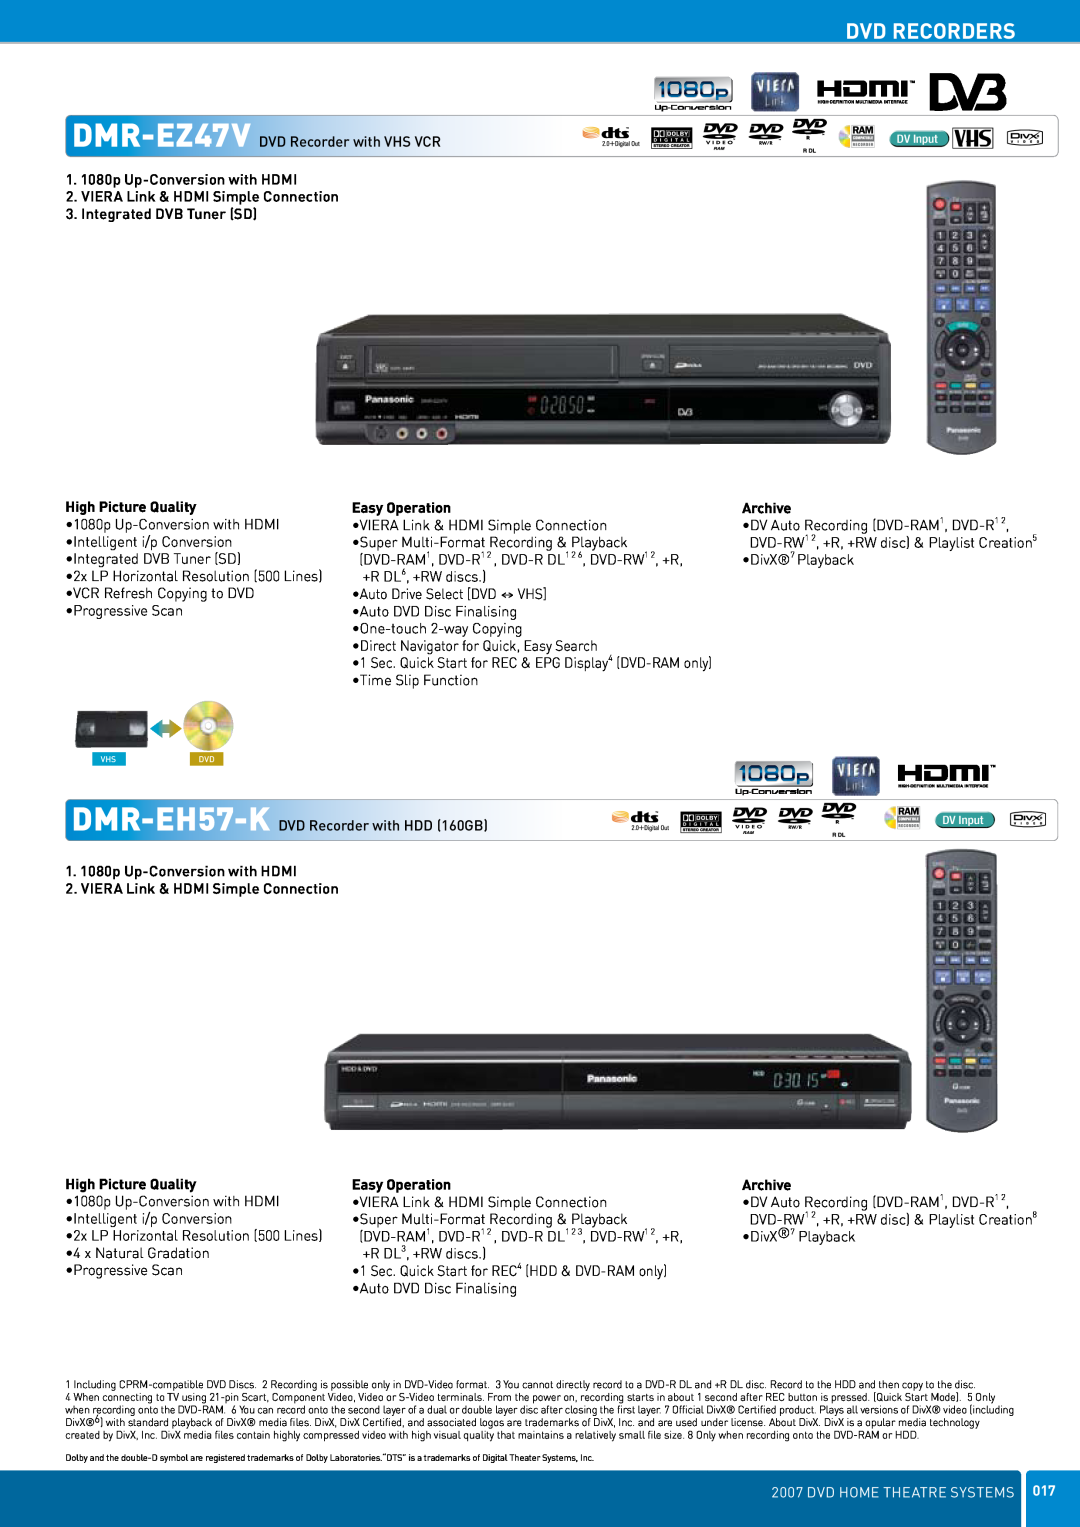 Panasonic DVD Home Theatre System Dvd Recorders, DMR-EZ47V DVD Recorder with VHS VCR, High Picture Quality, Easy Operation 